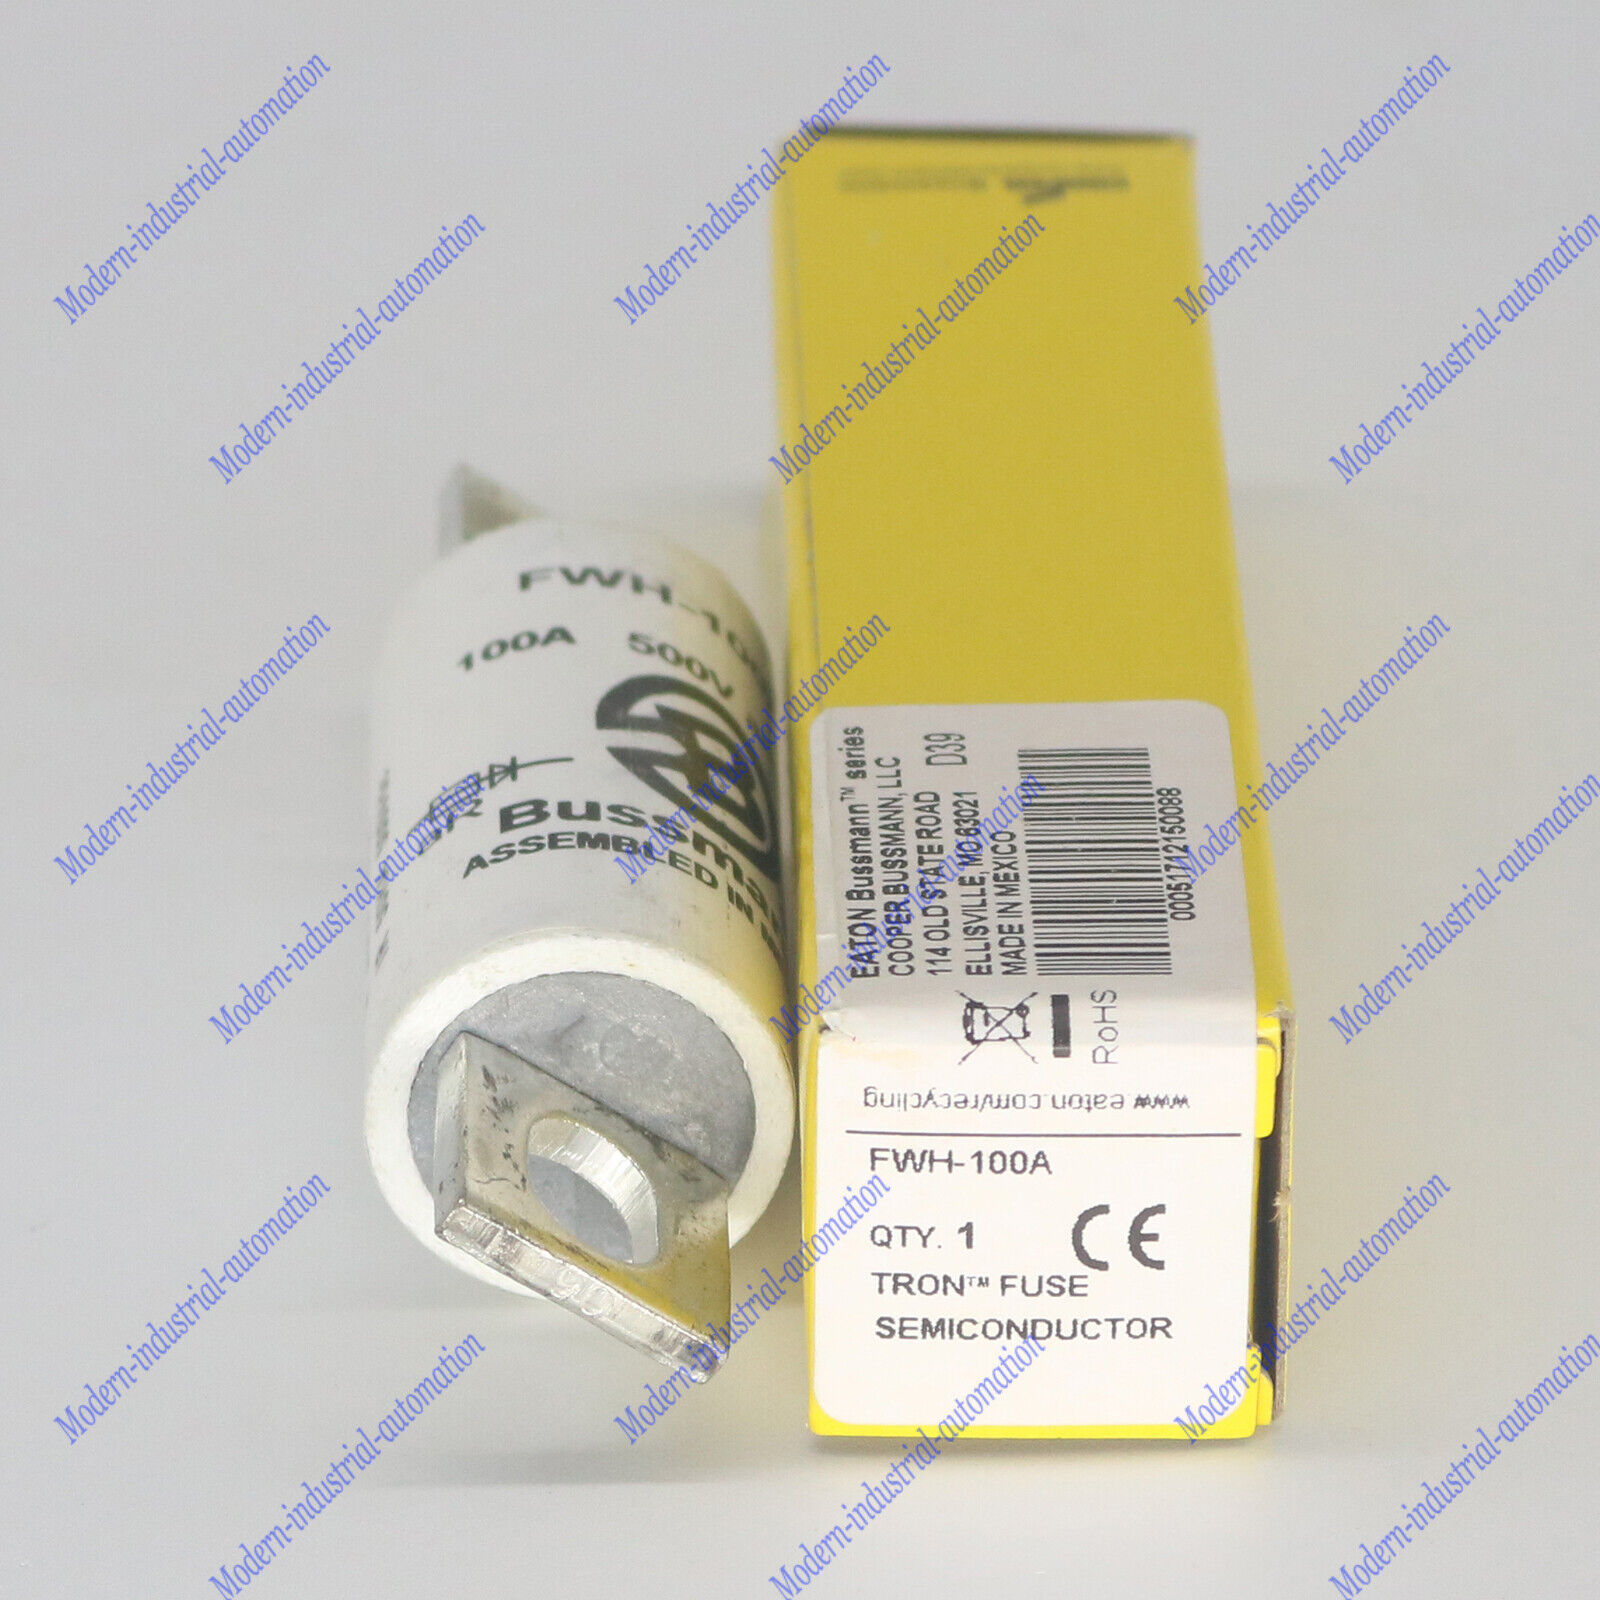 1PC new Bussmann FWH-100A 100 Amp (100A) 500V Fast Acting Fuse  #YP1